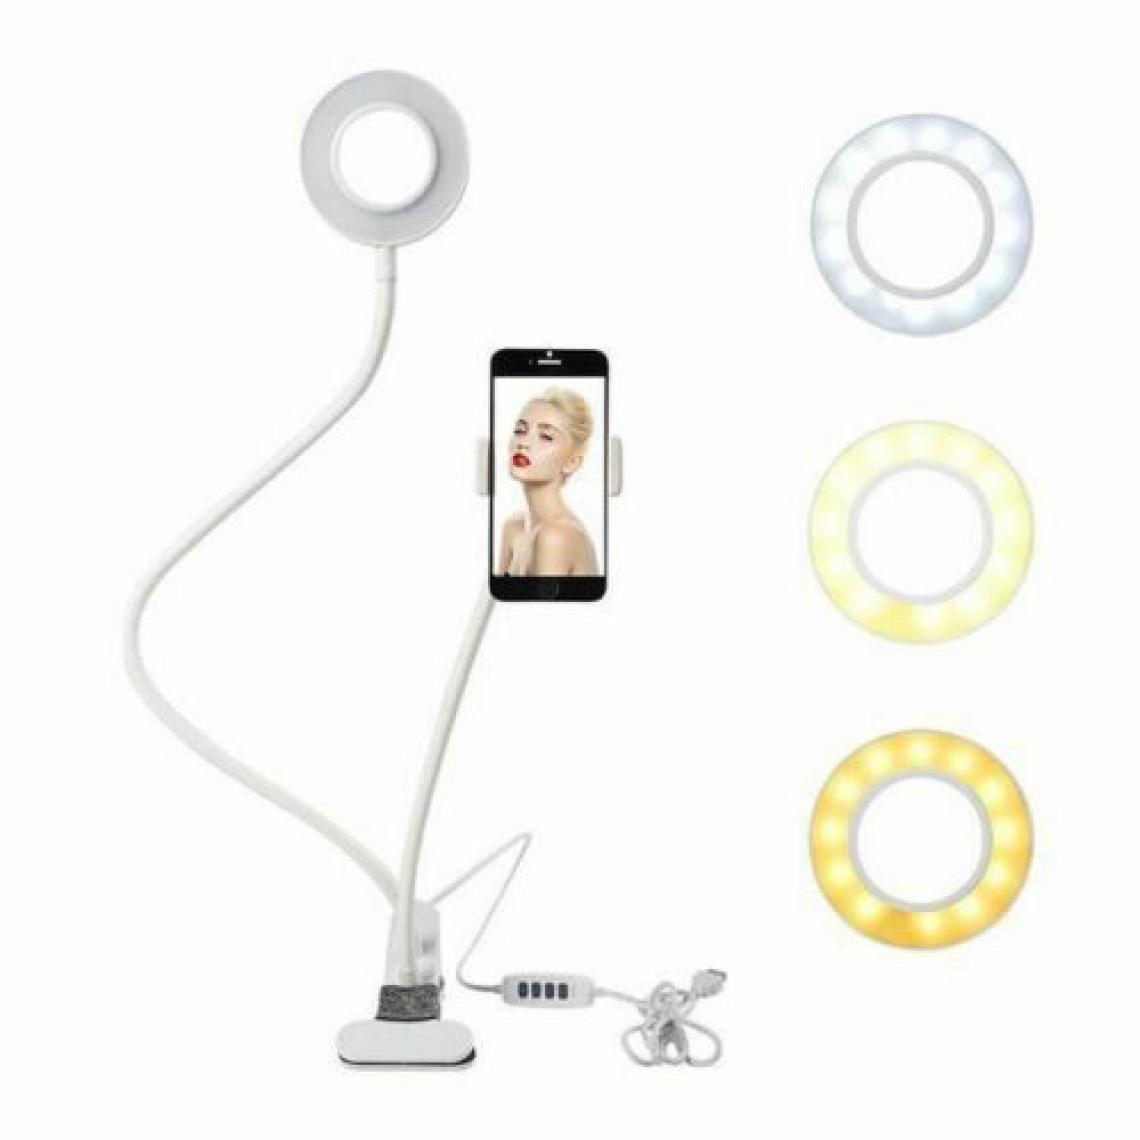 Ozzzo - Stand support bureau selfie led ozzzo blanc pour Elephone A8 - Station d'accueil smartphone